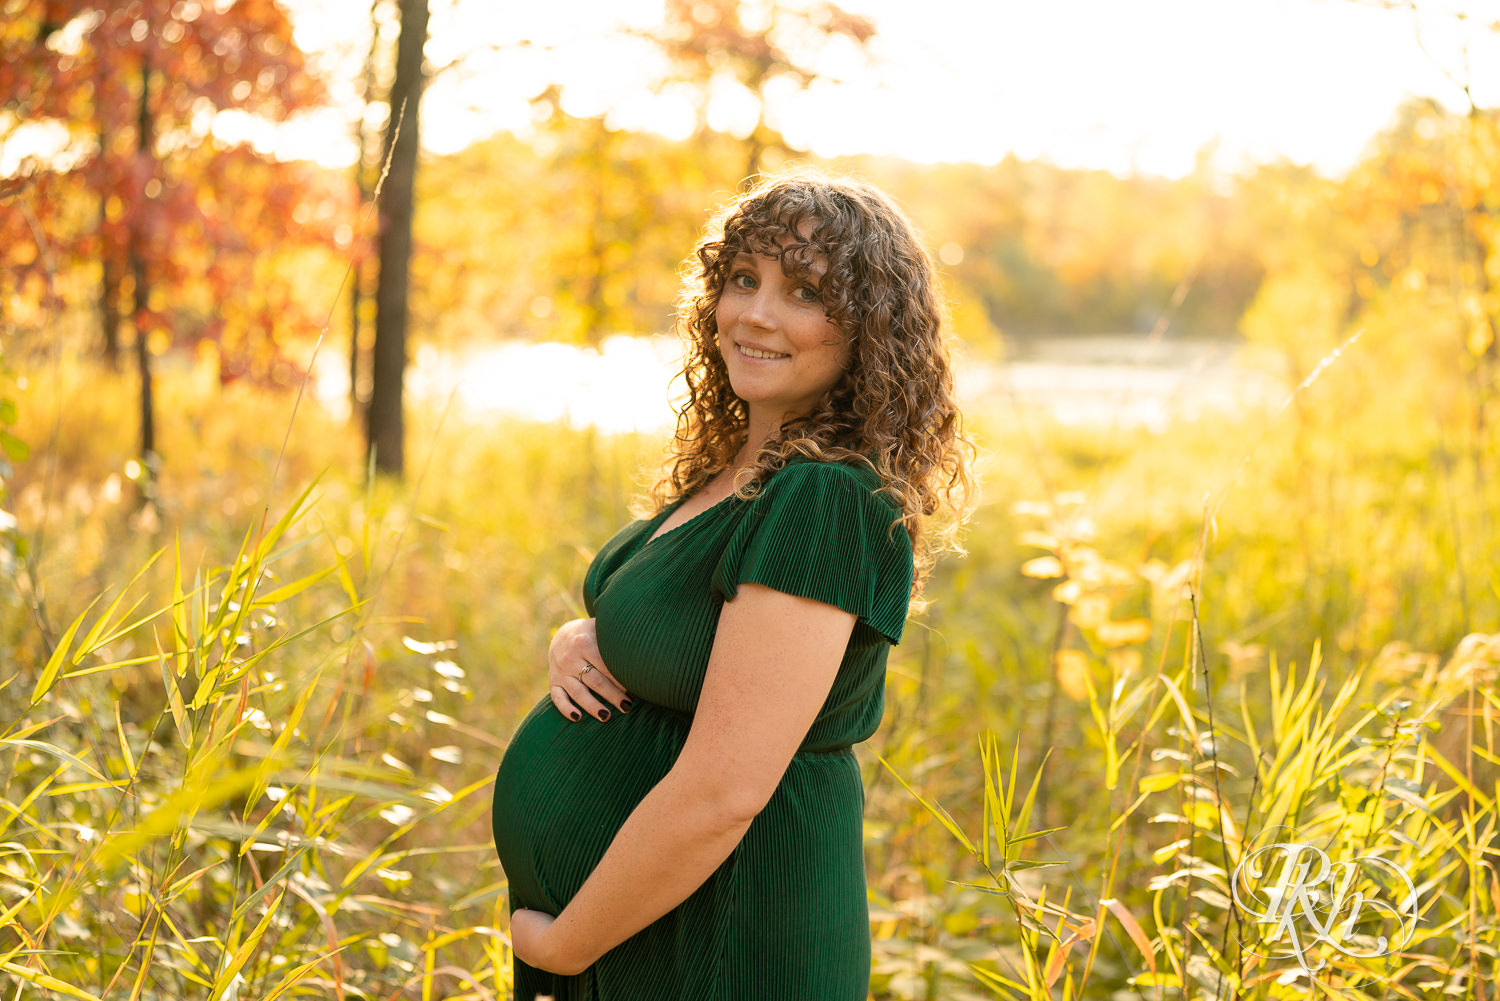 Pregnant woman in green dress holds belly in field during maternity photography in Lebanon Hills Regional Park in Eagan, Minnesota.